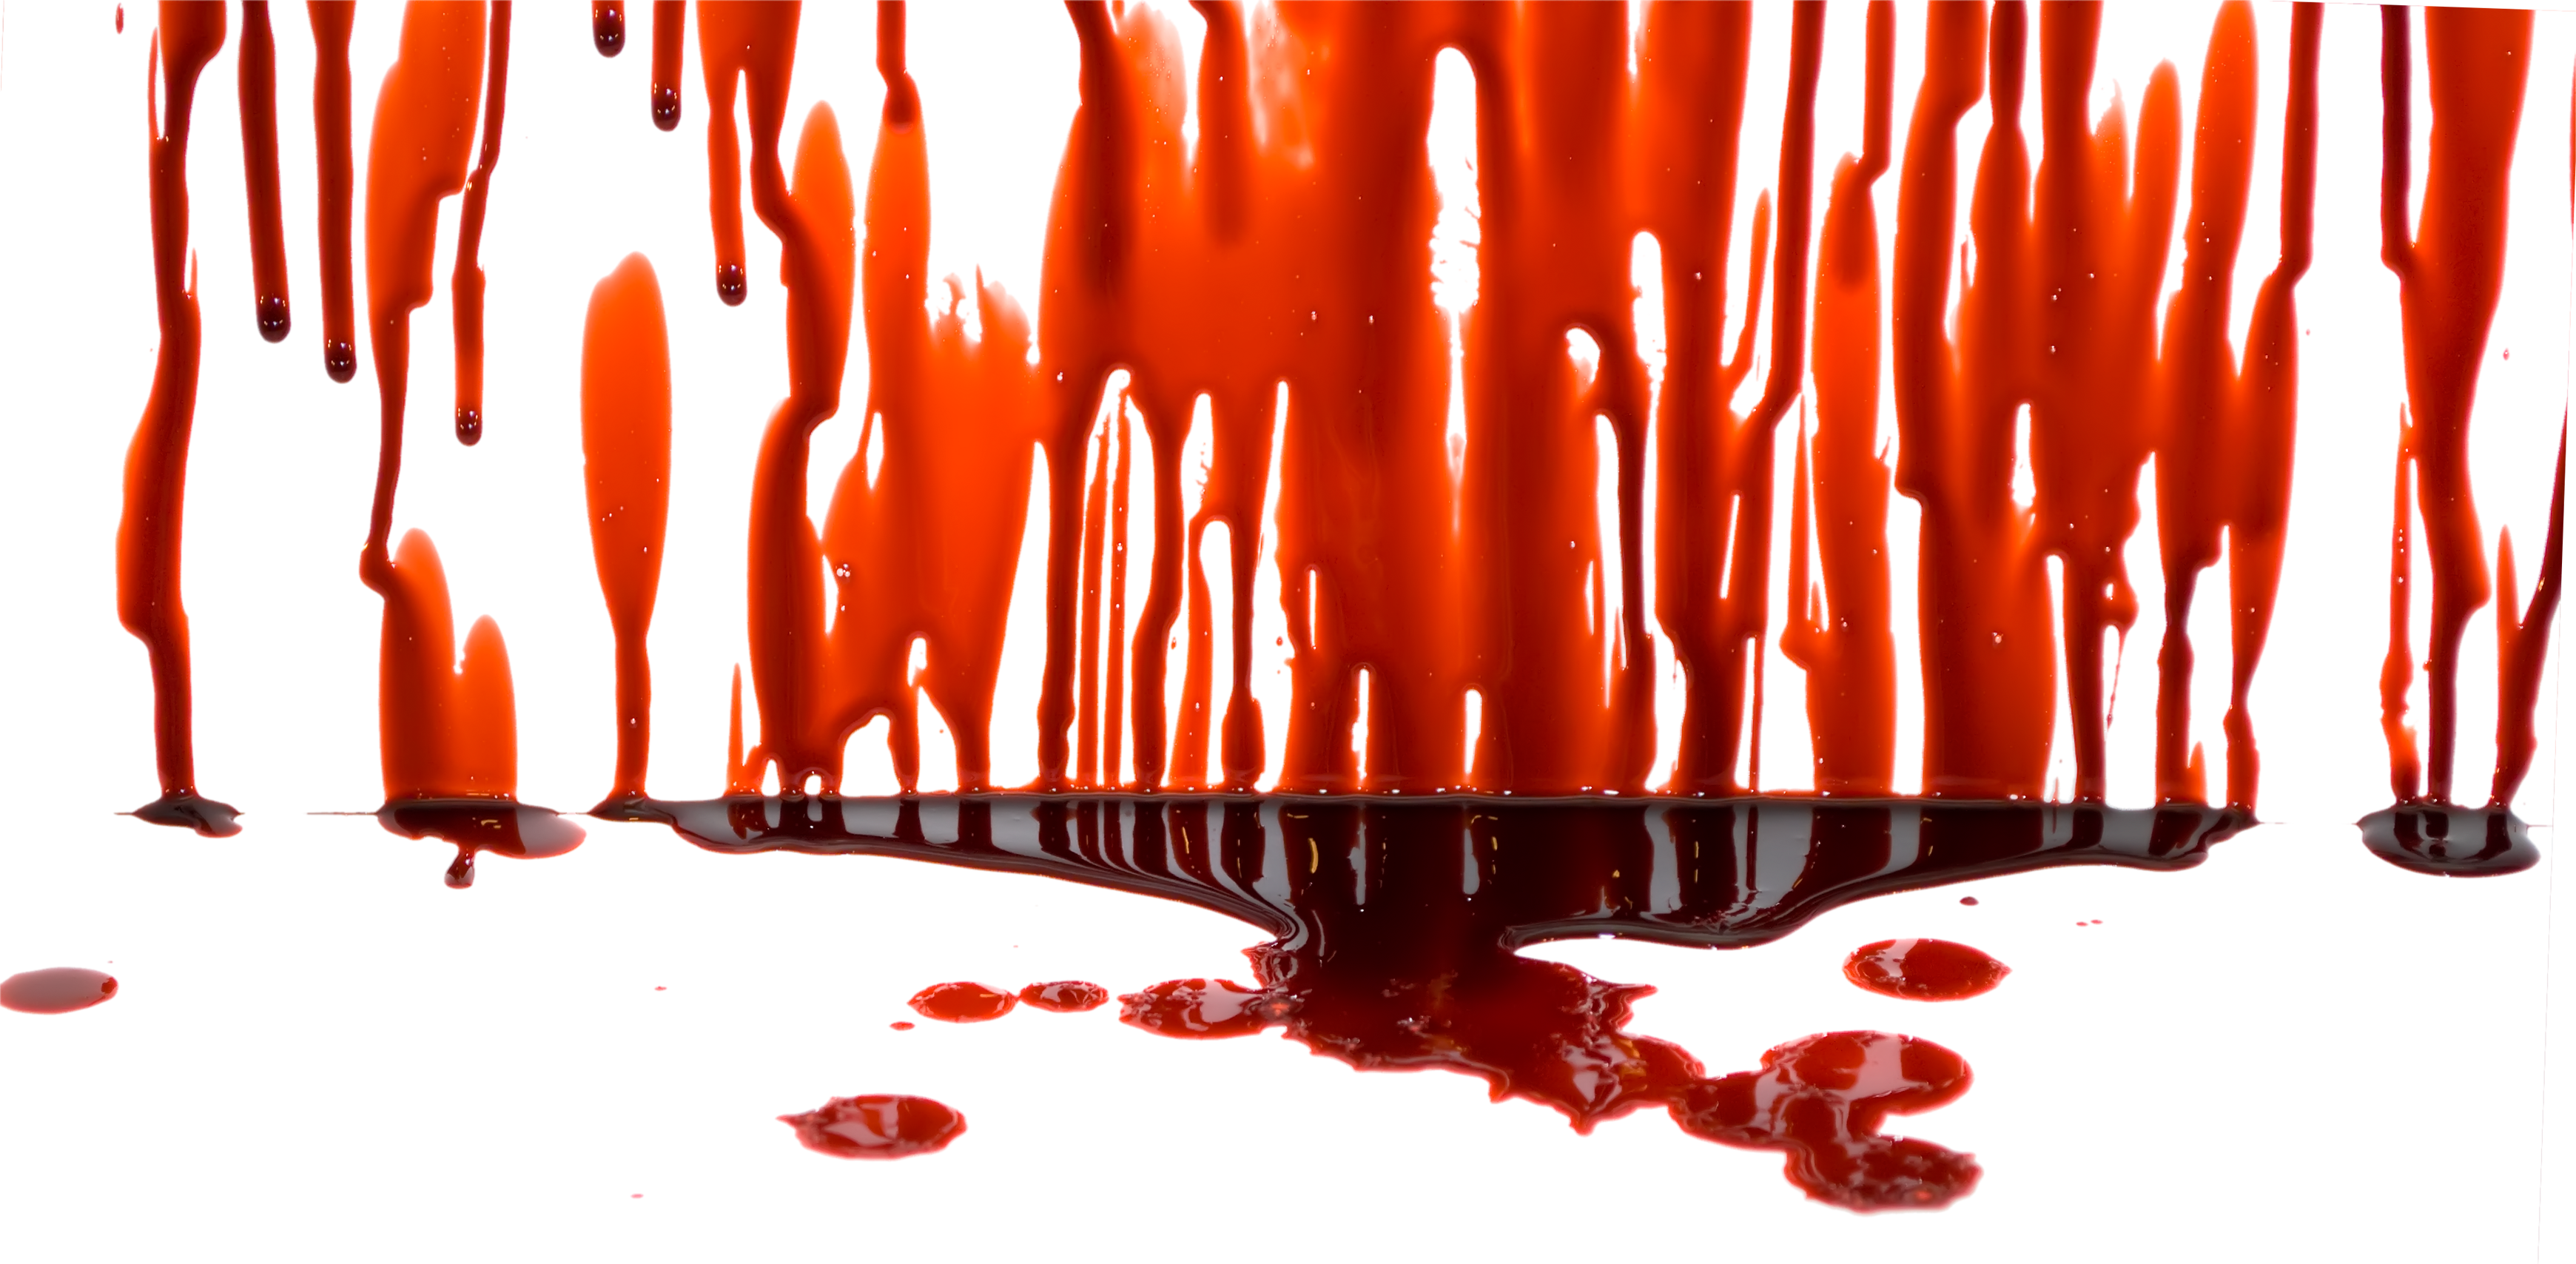 Dripping Blood PNG Transparent Dripping Blood.PNG Images. | PlusPNG